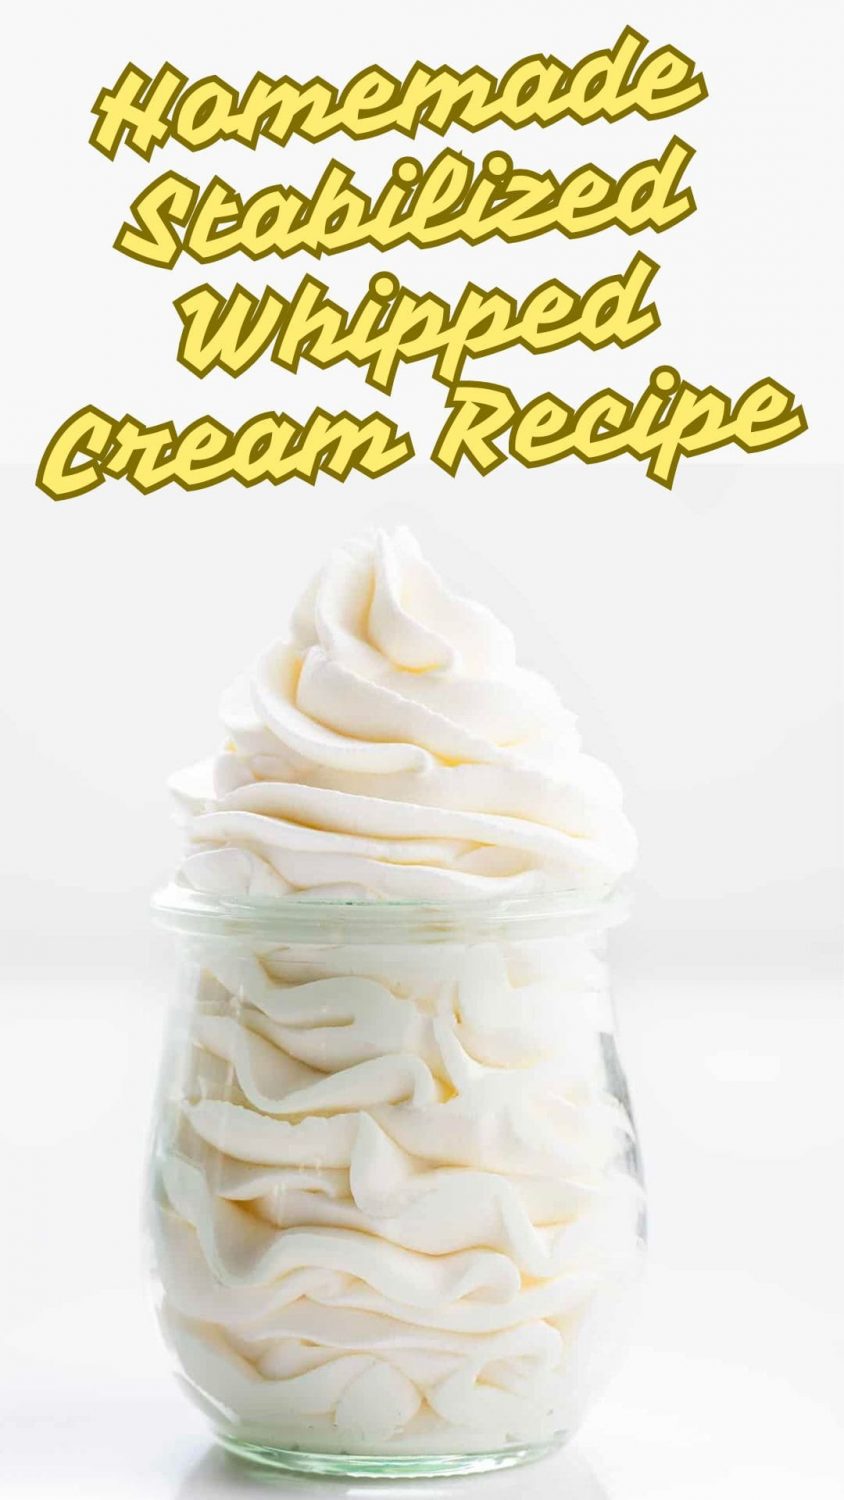 Homemade Stabilized Whipped Cream Recipe